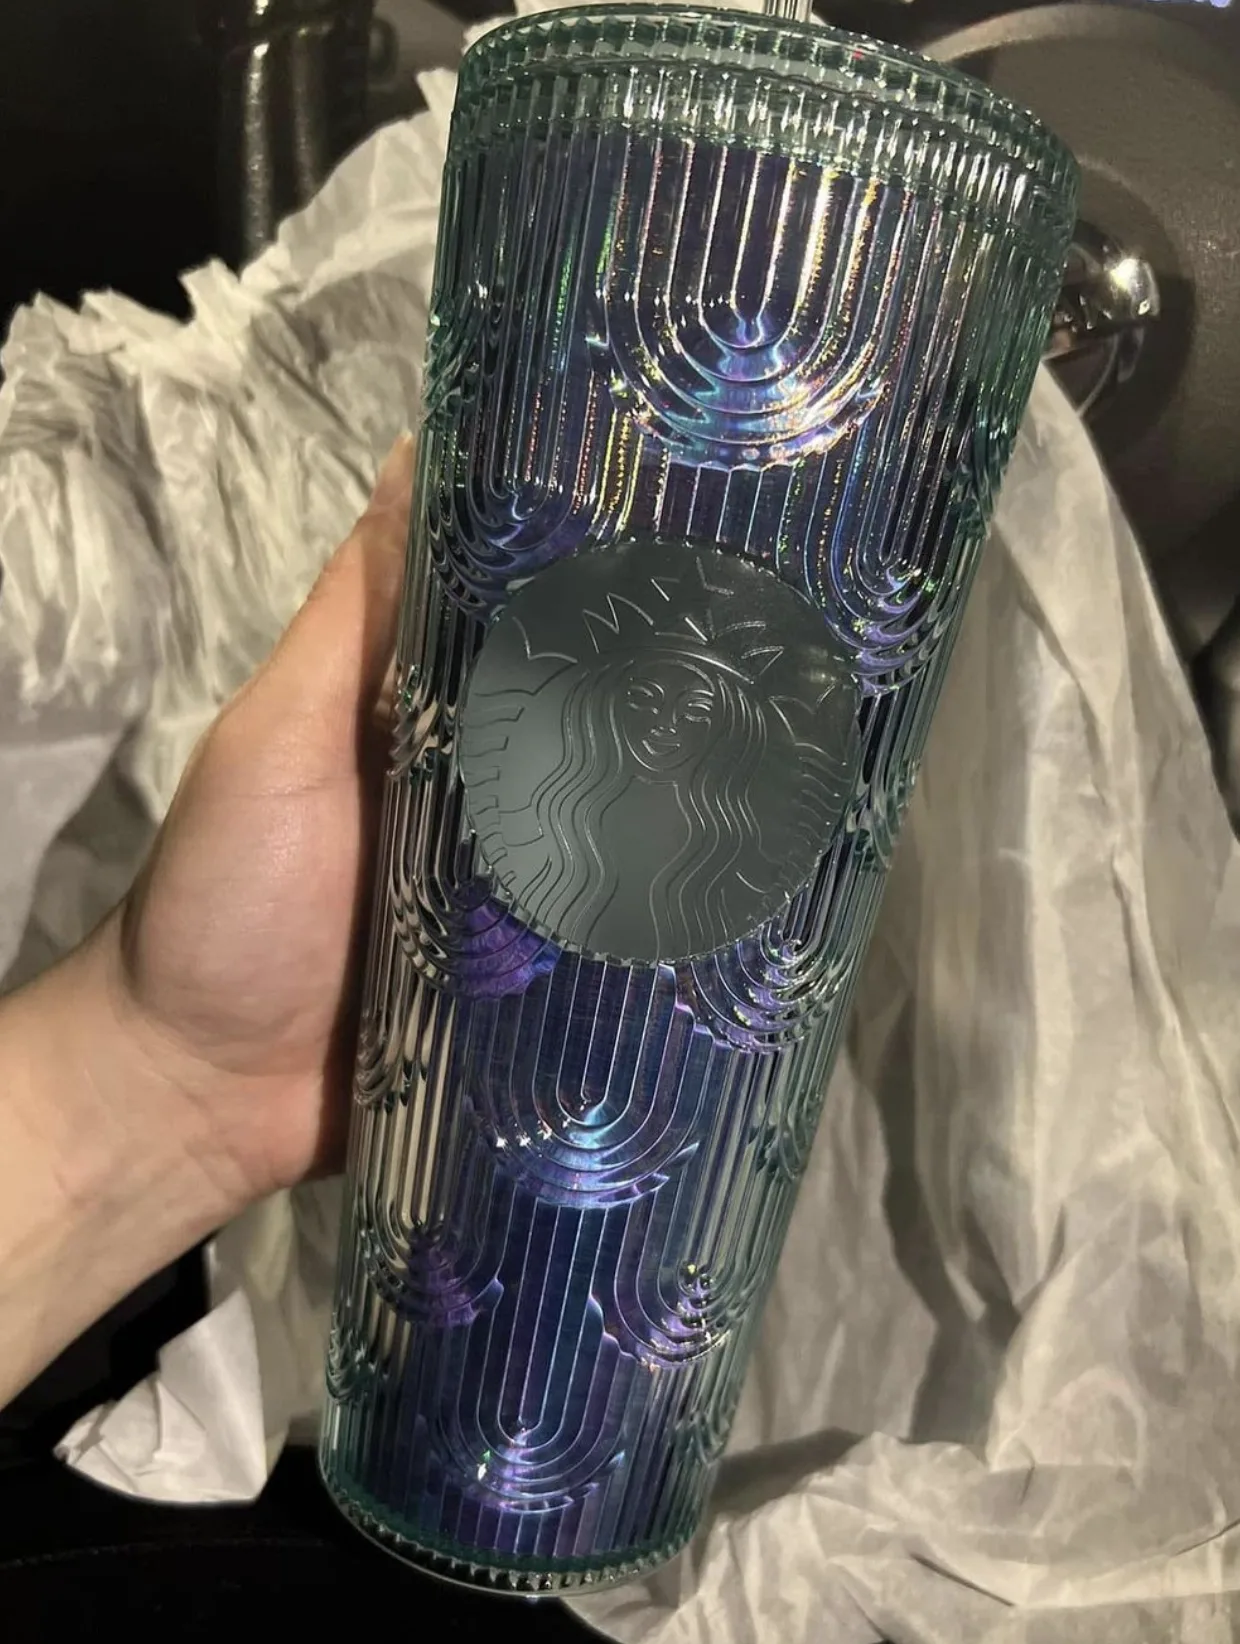 Starbucks Released A New Iridescent Cup That Gives Off Art Deco Vibes